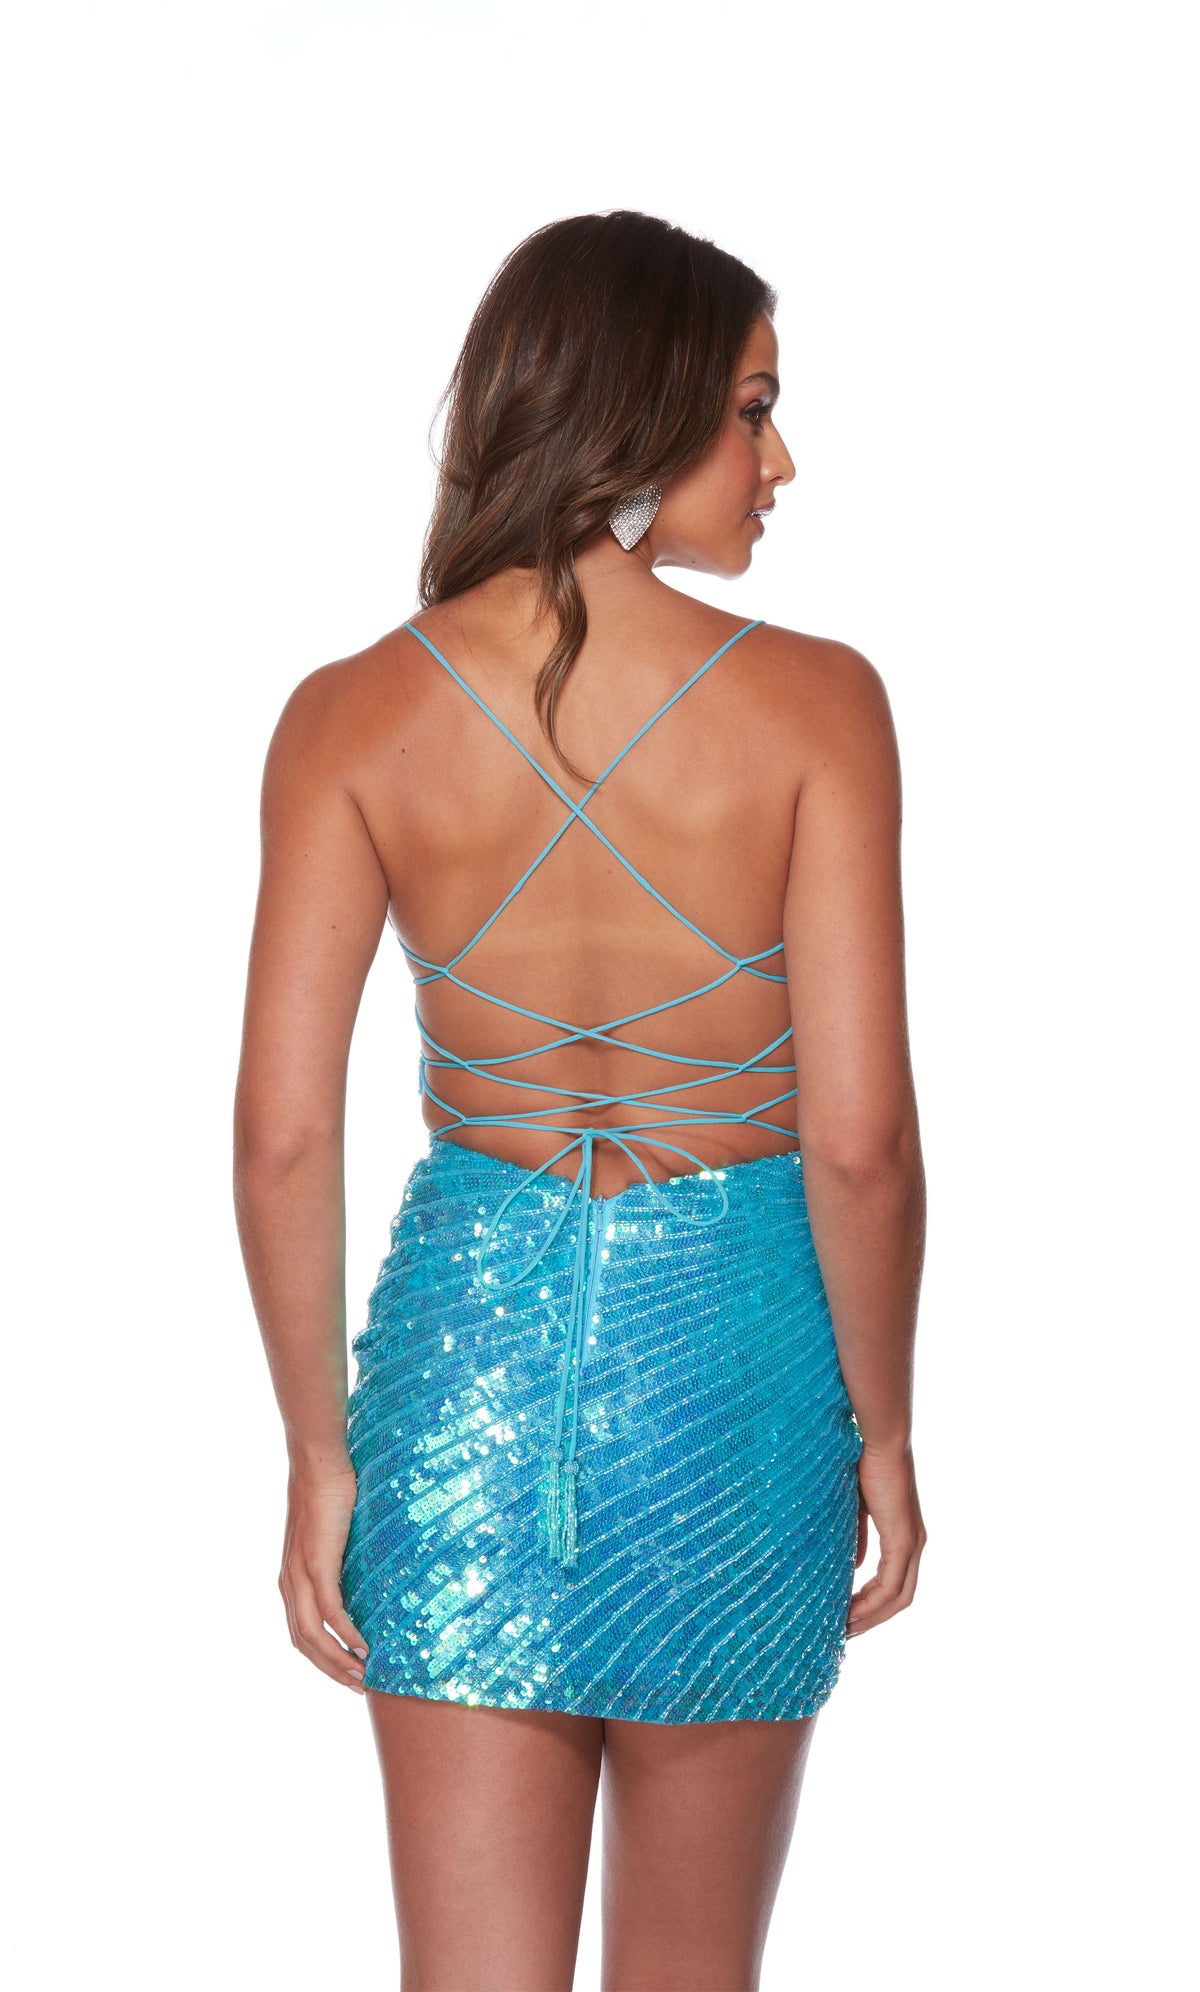 A glamorous carribbean blue sequined homecoming dress with a strappy open back, a plunging neckline, and a fitted silhouette, perfect for a night of dancing and celebration.